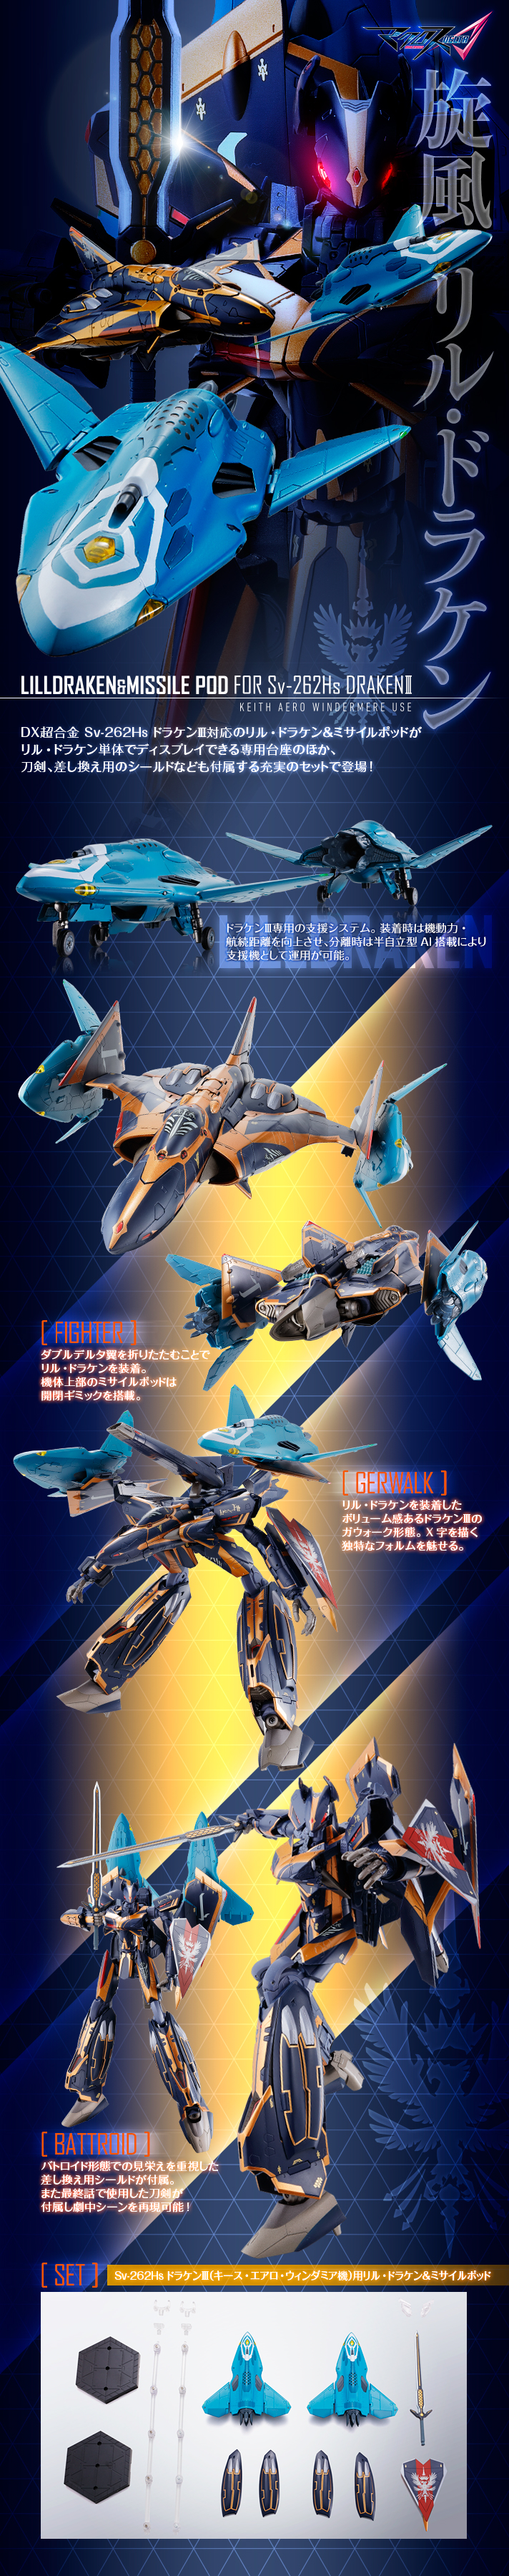 Zx31's Content - Page 19 - Macross World Forums